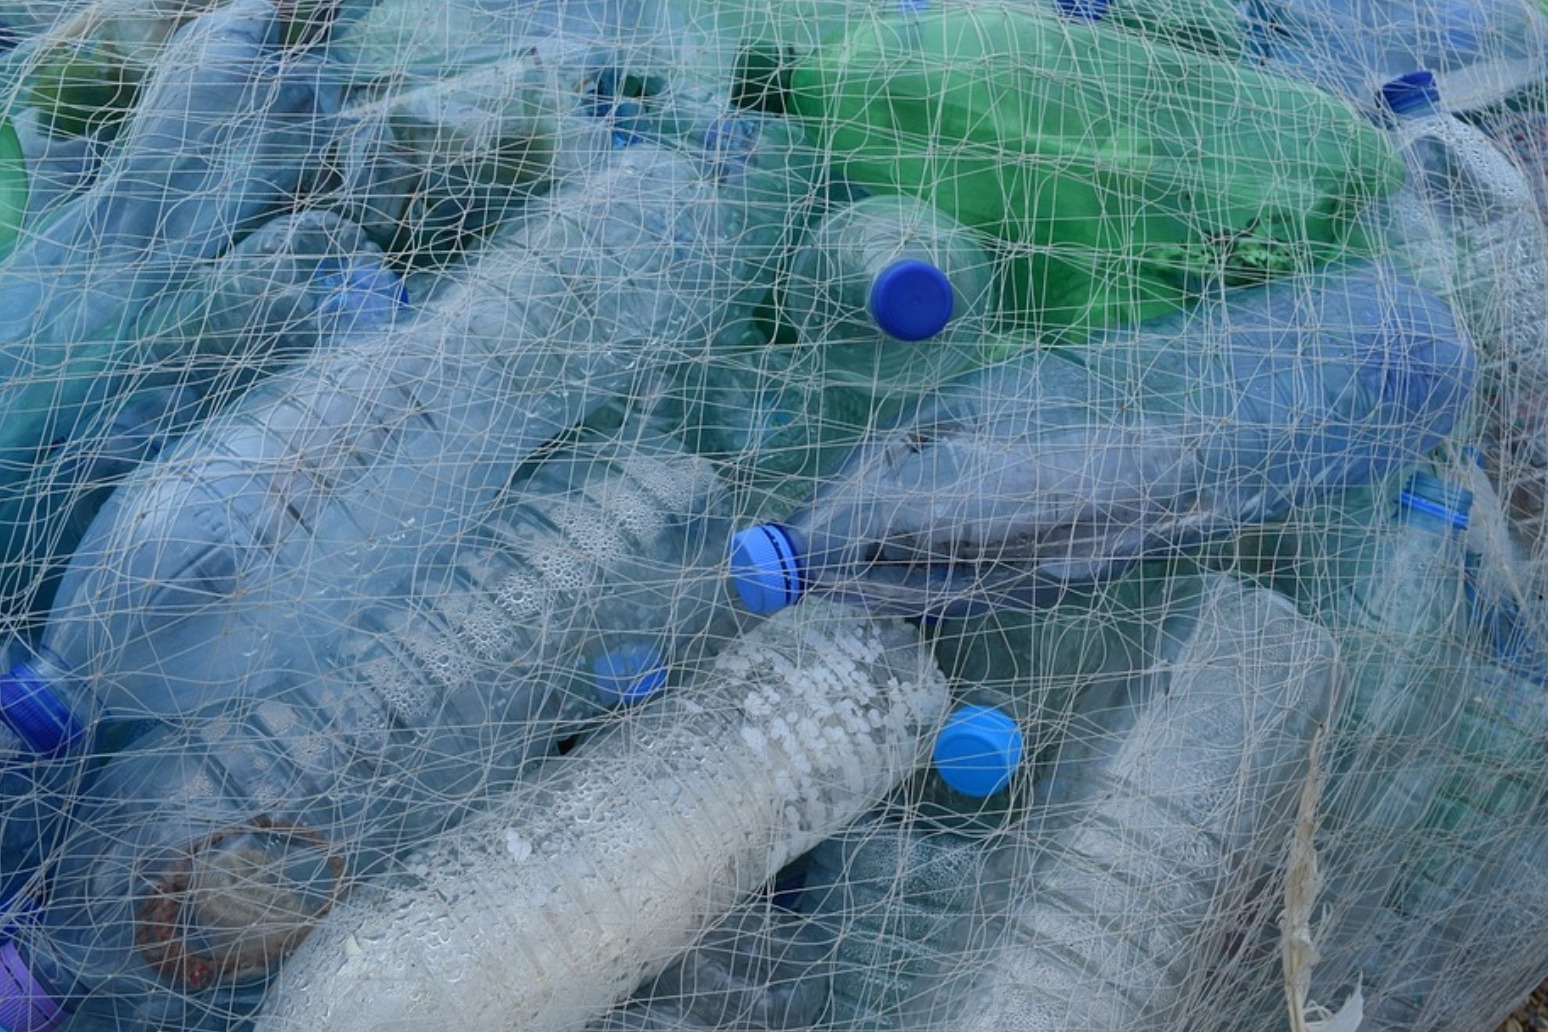 New national drinking water scheme to cut plastic bottle use by millions 